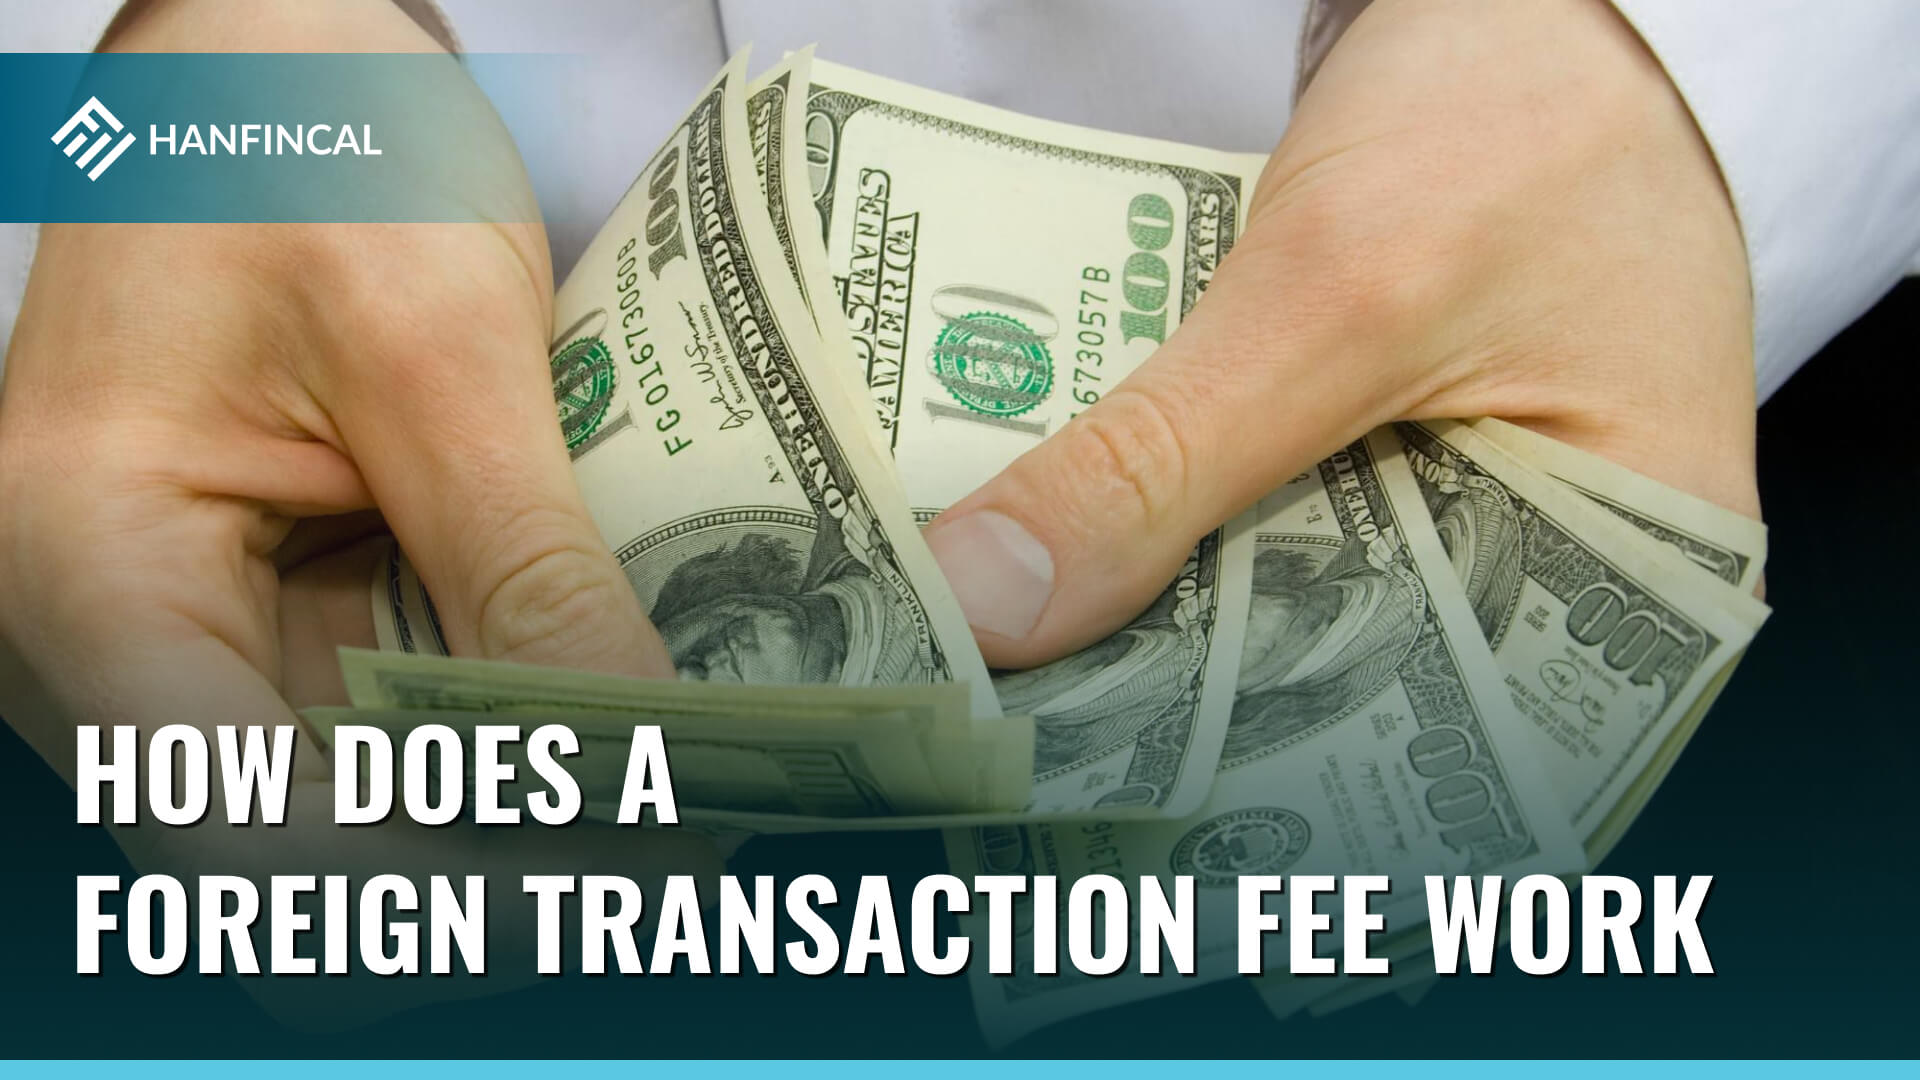 How does a foreign transaction fee work?